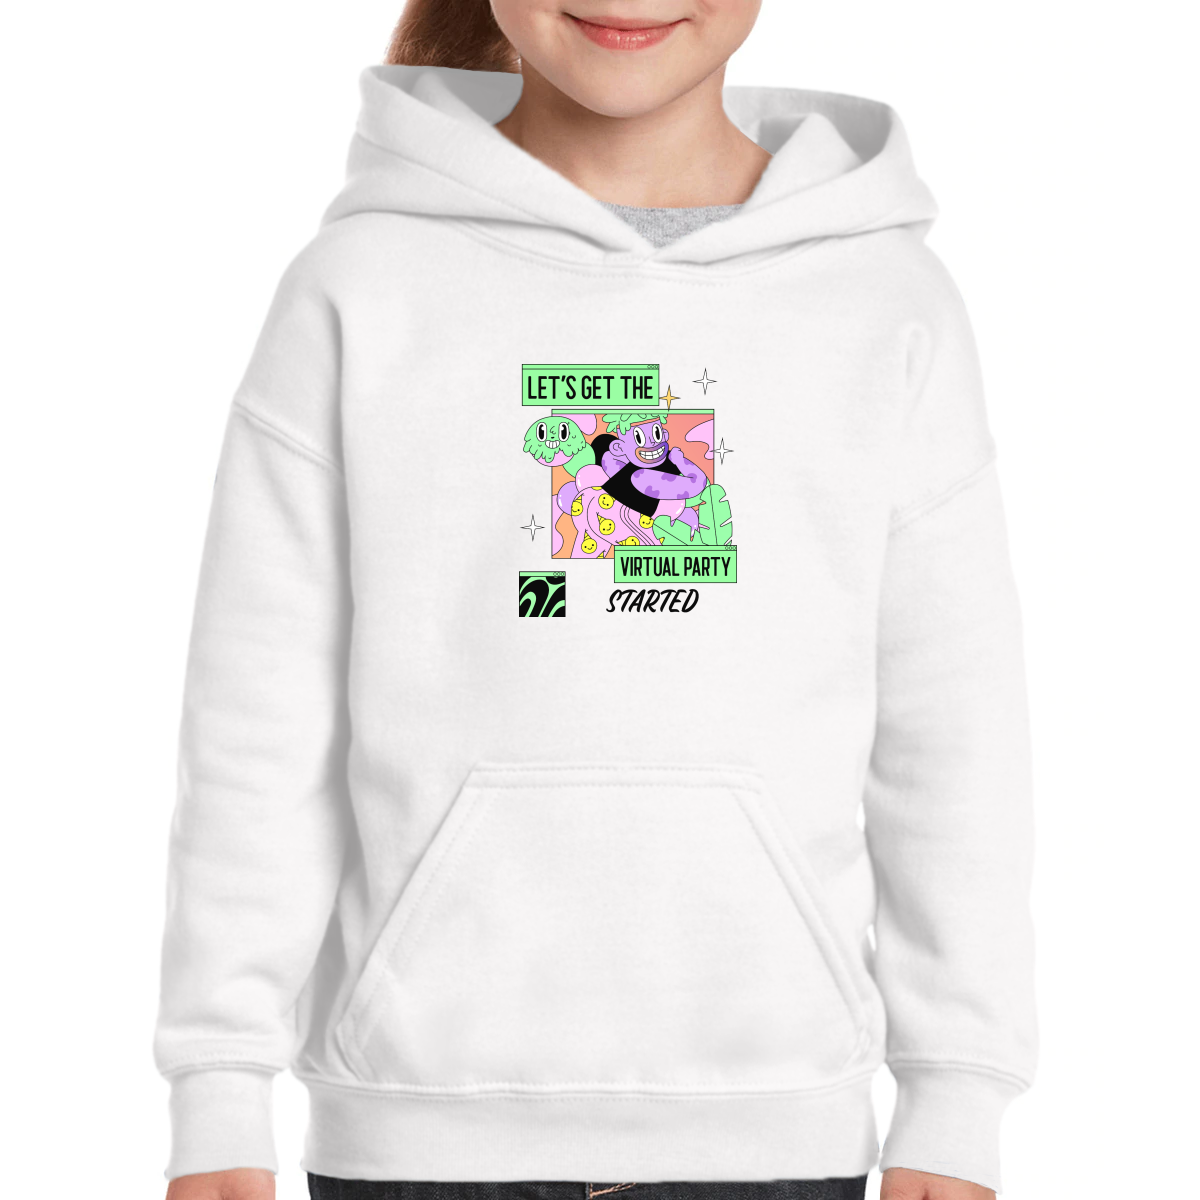 Let's get the virtual party started Kids Hoodie | White